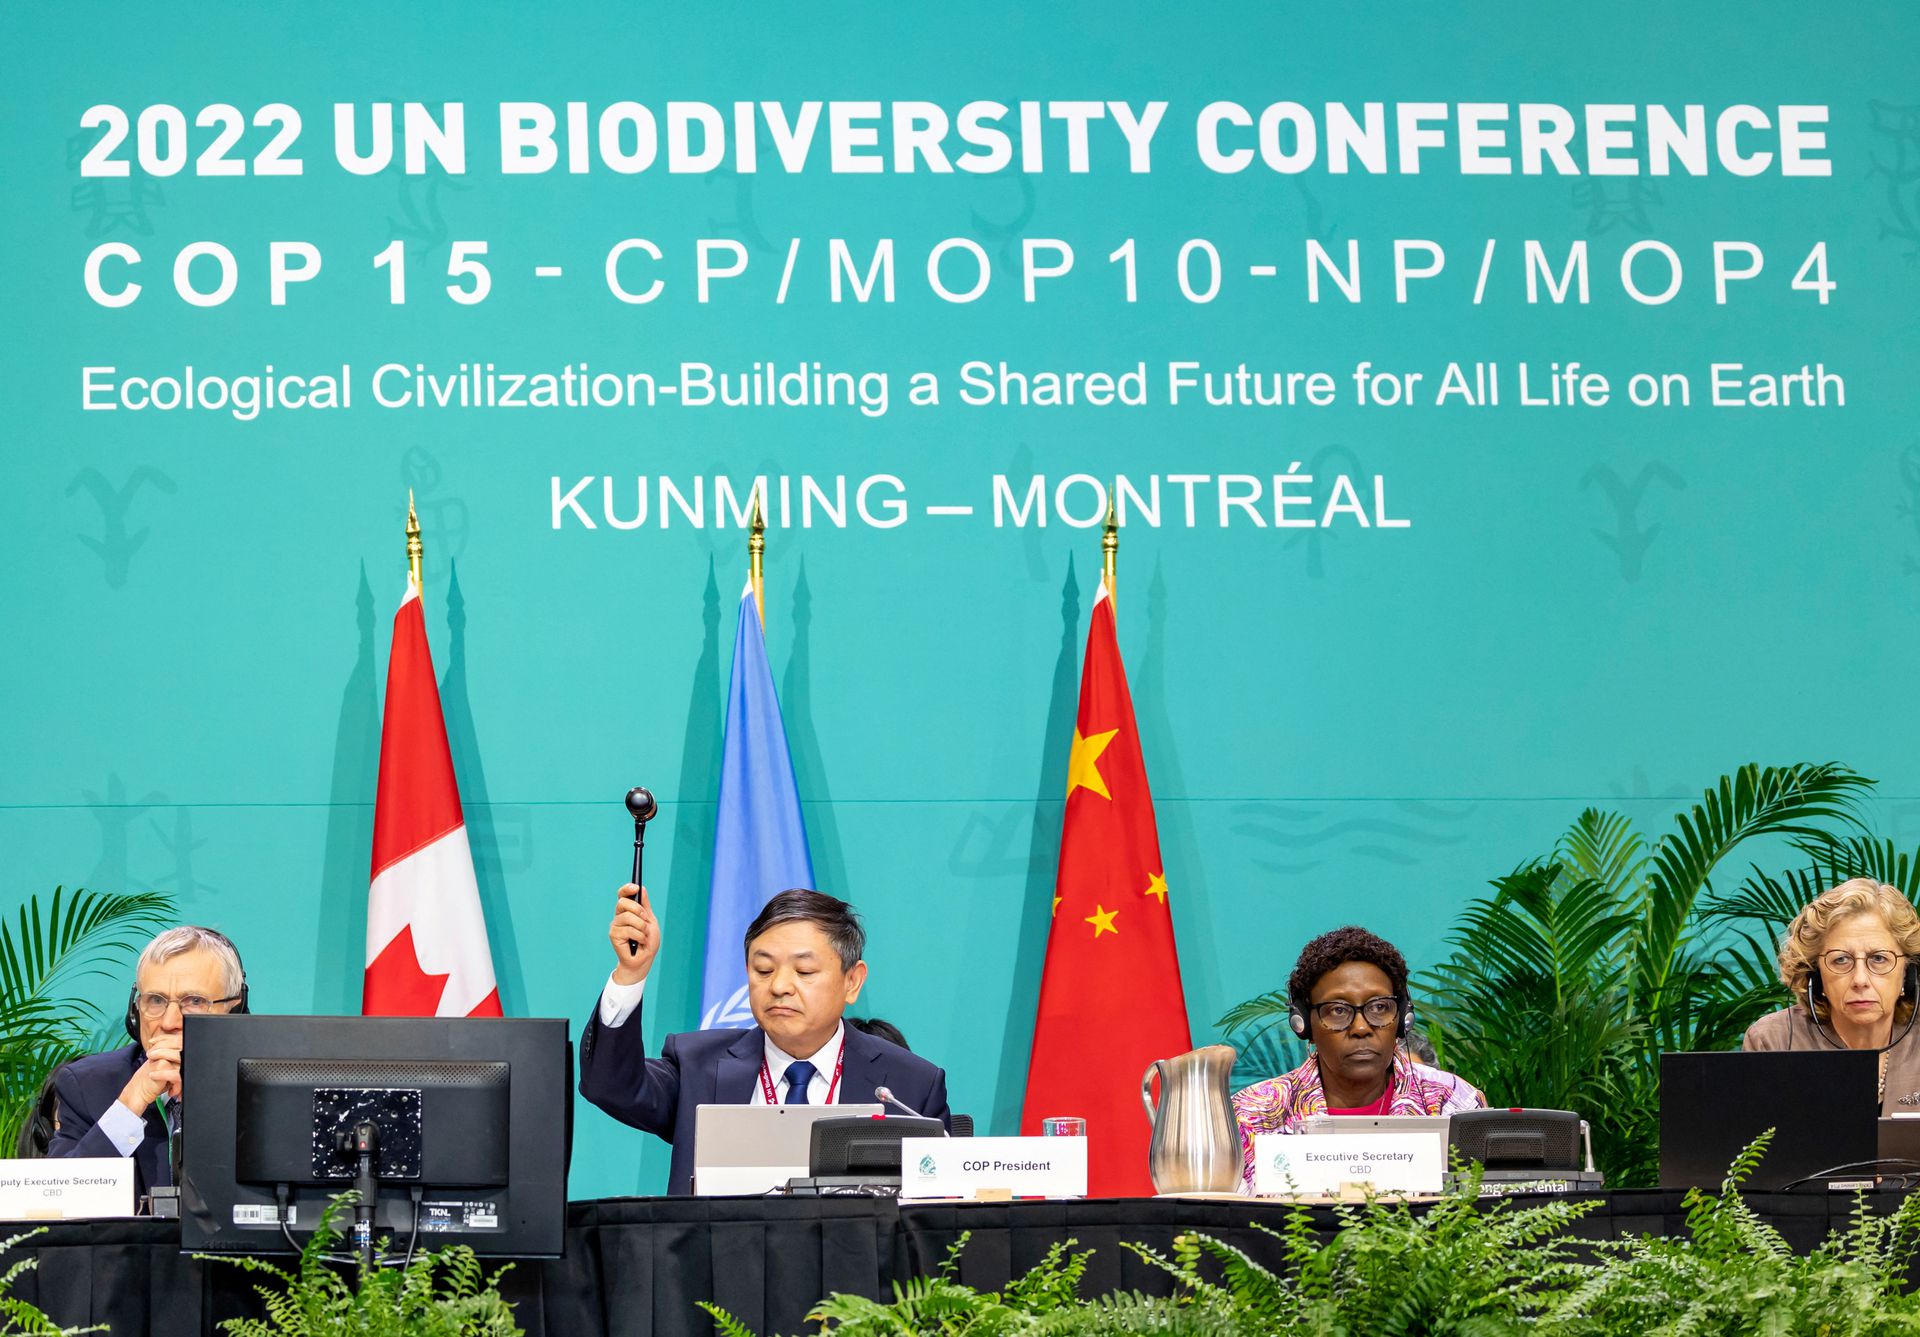 The leadership of the U.N.-backed COP15 biodiversity conference applaud after passing the Kunming-Montreal Global Biodiversity Framework in Montreal, Quebec, Canada, 19 December 2022. Photo: Julian Haber / UN Biodiversity / REUTERS